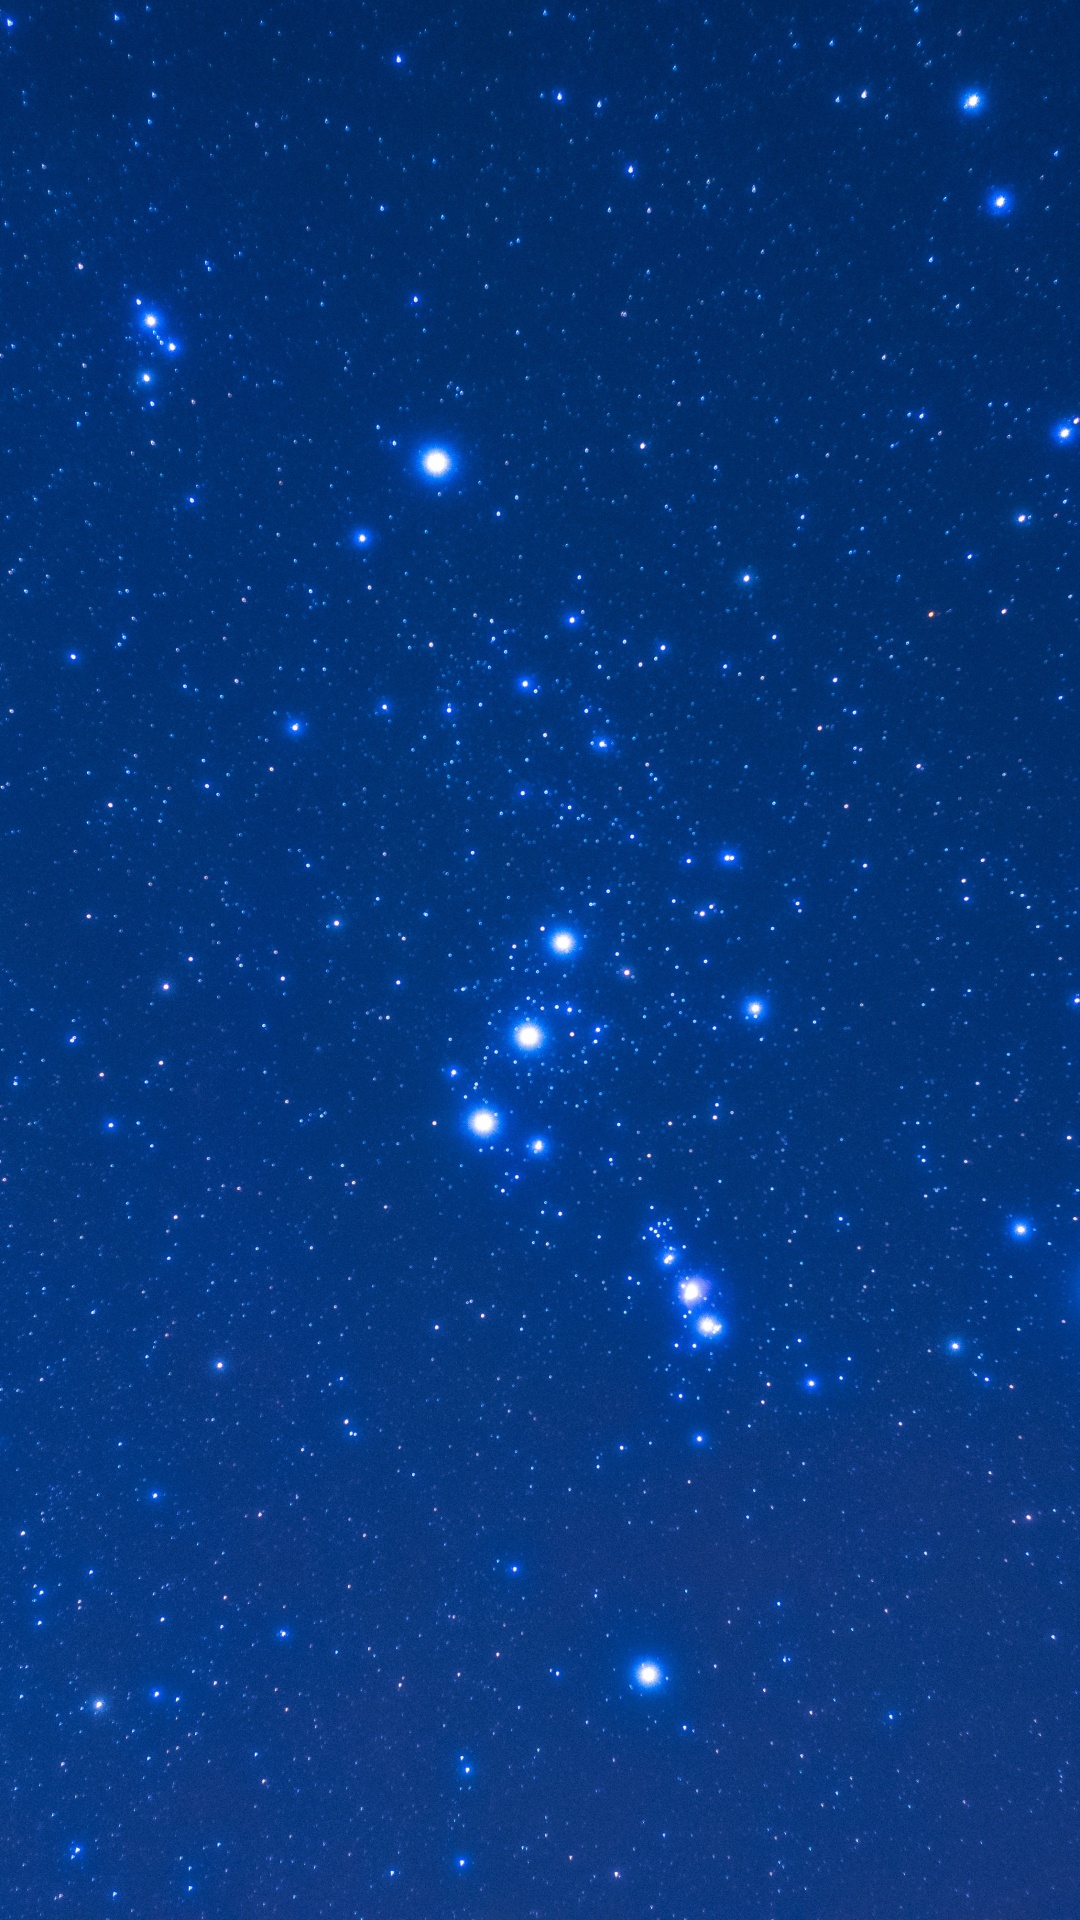 Blue and White Stars in Blue Sky. Wallpaper in 1080x1920 Resolution